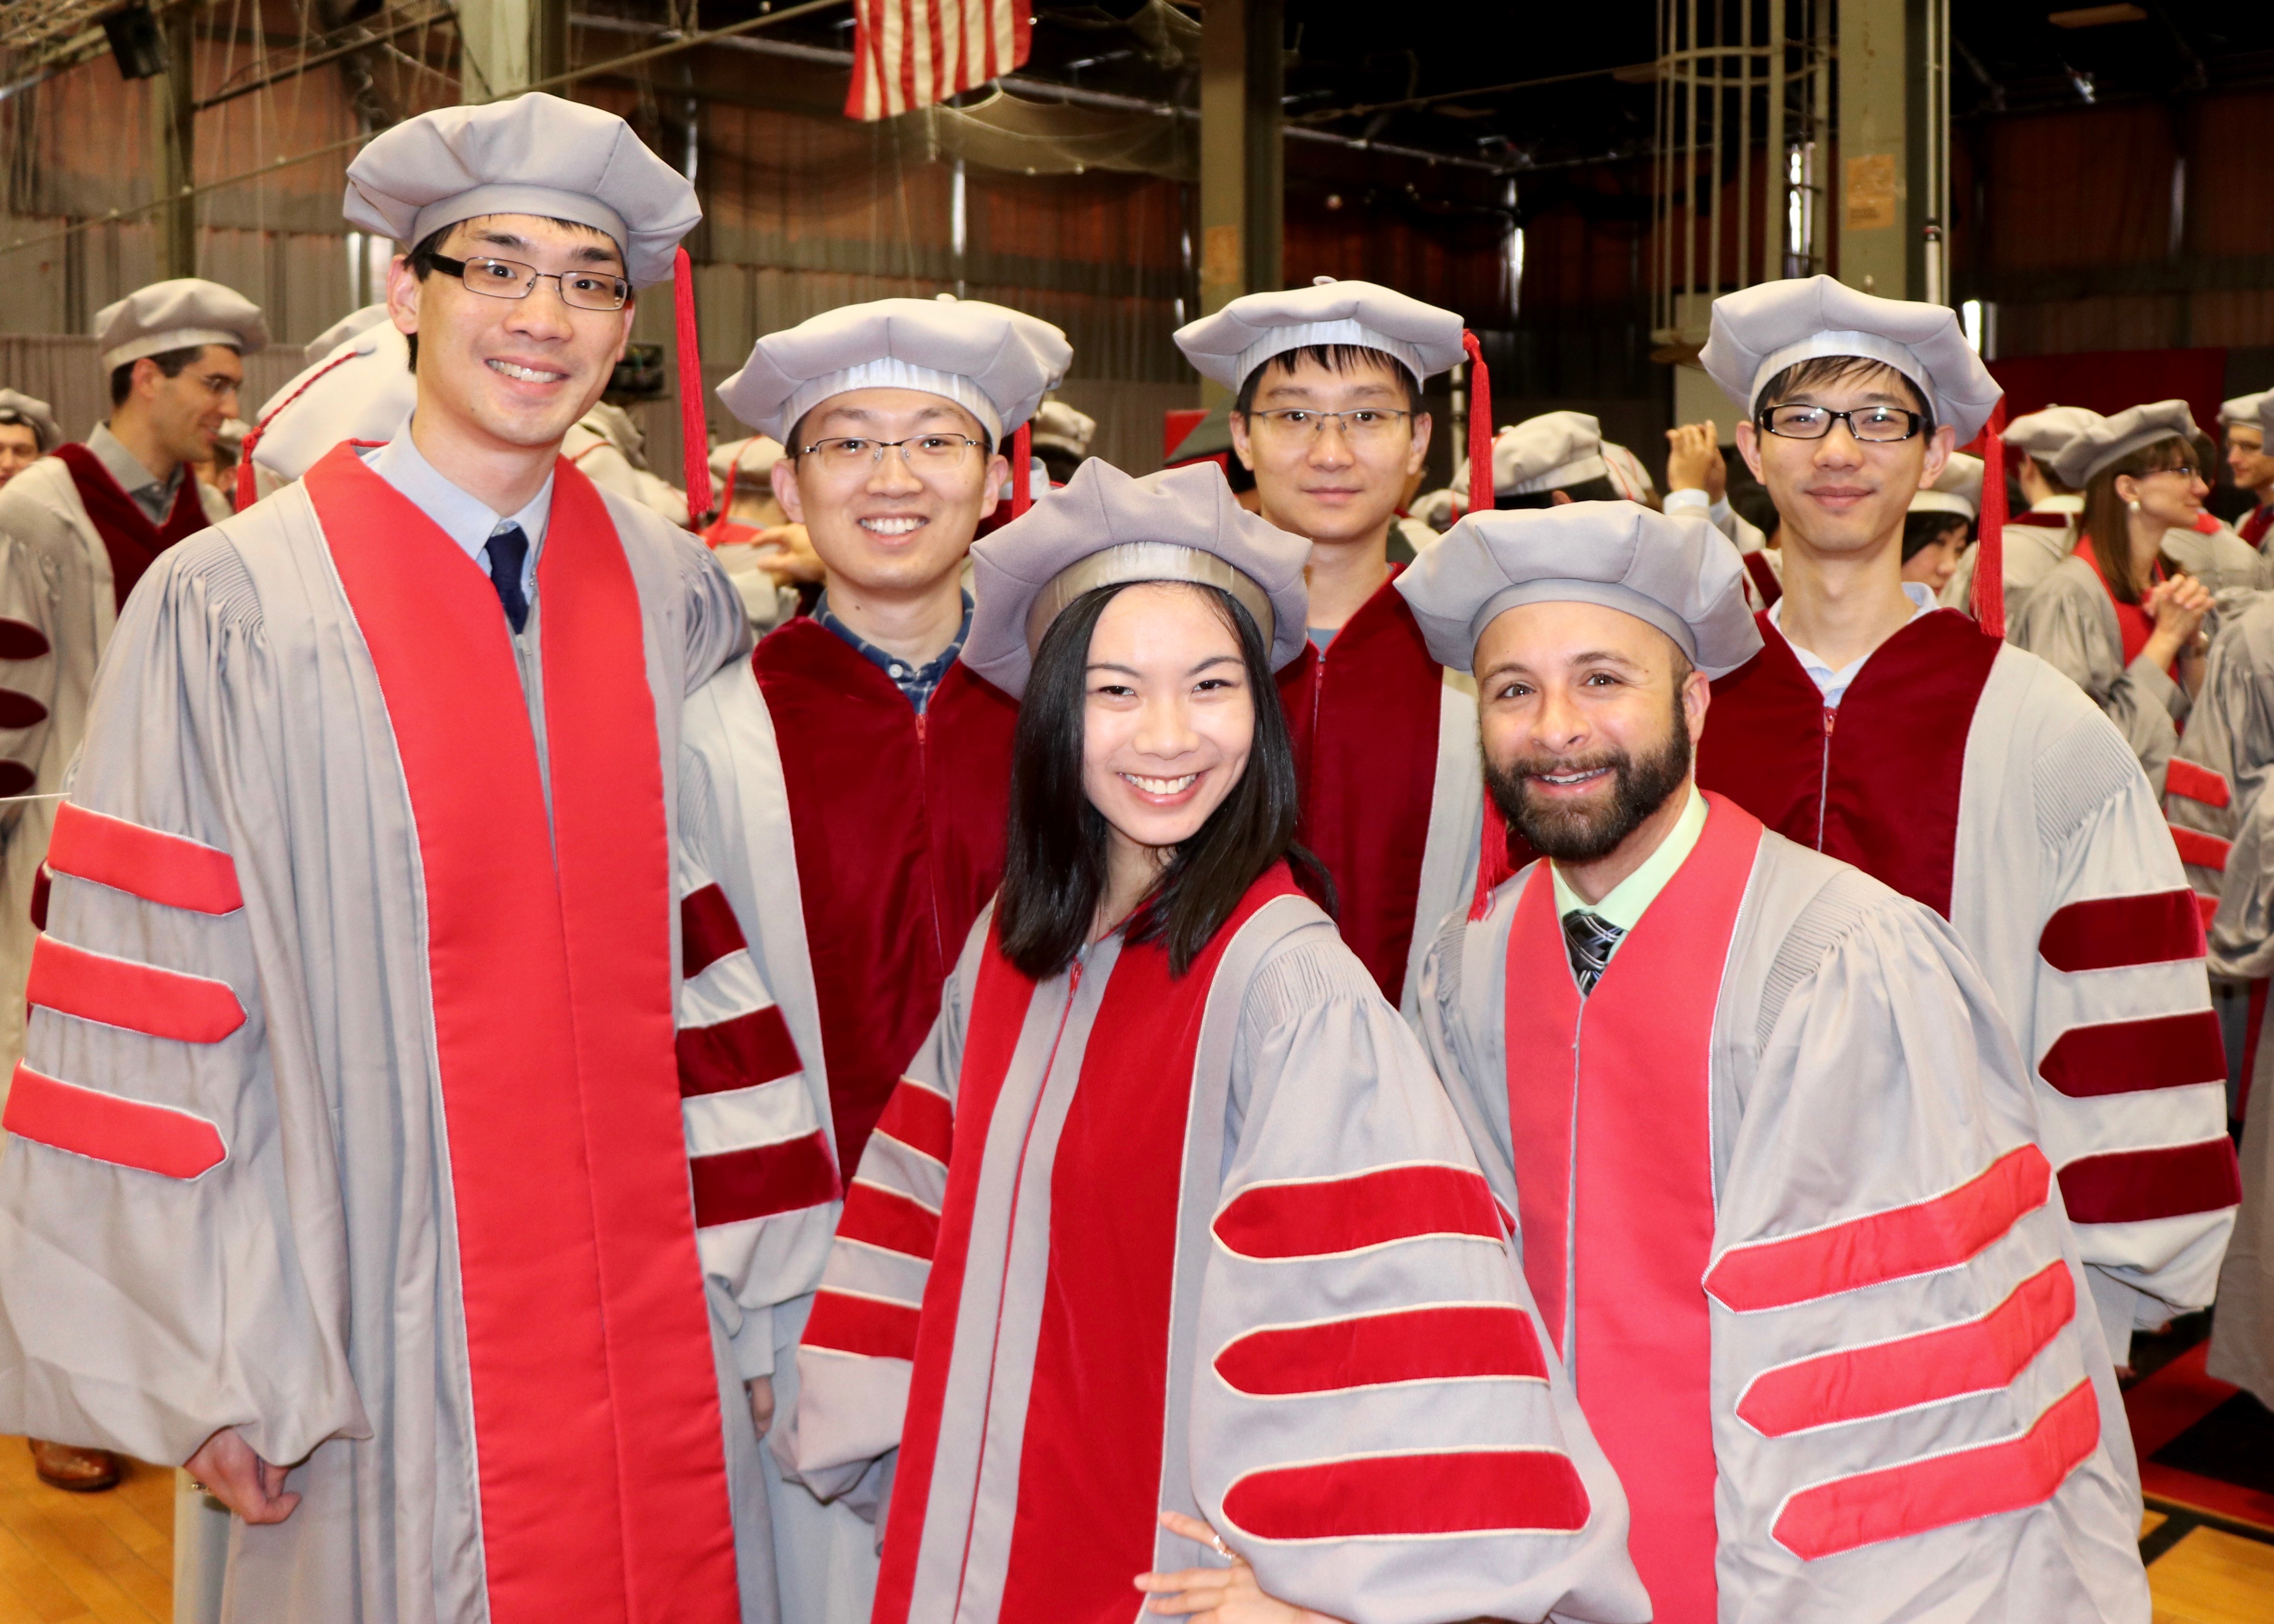 PhD recipients smile together before receiving their doctoral hoods